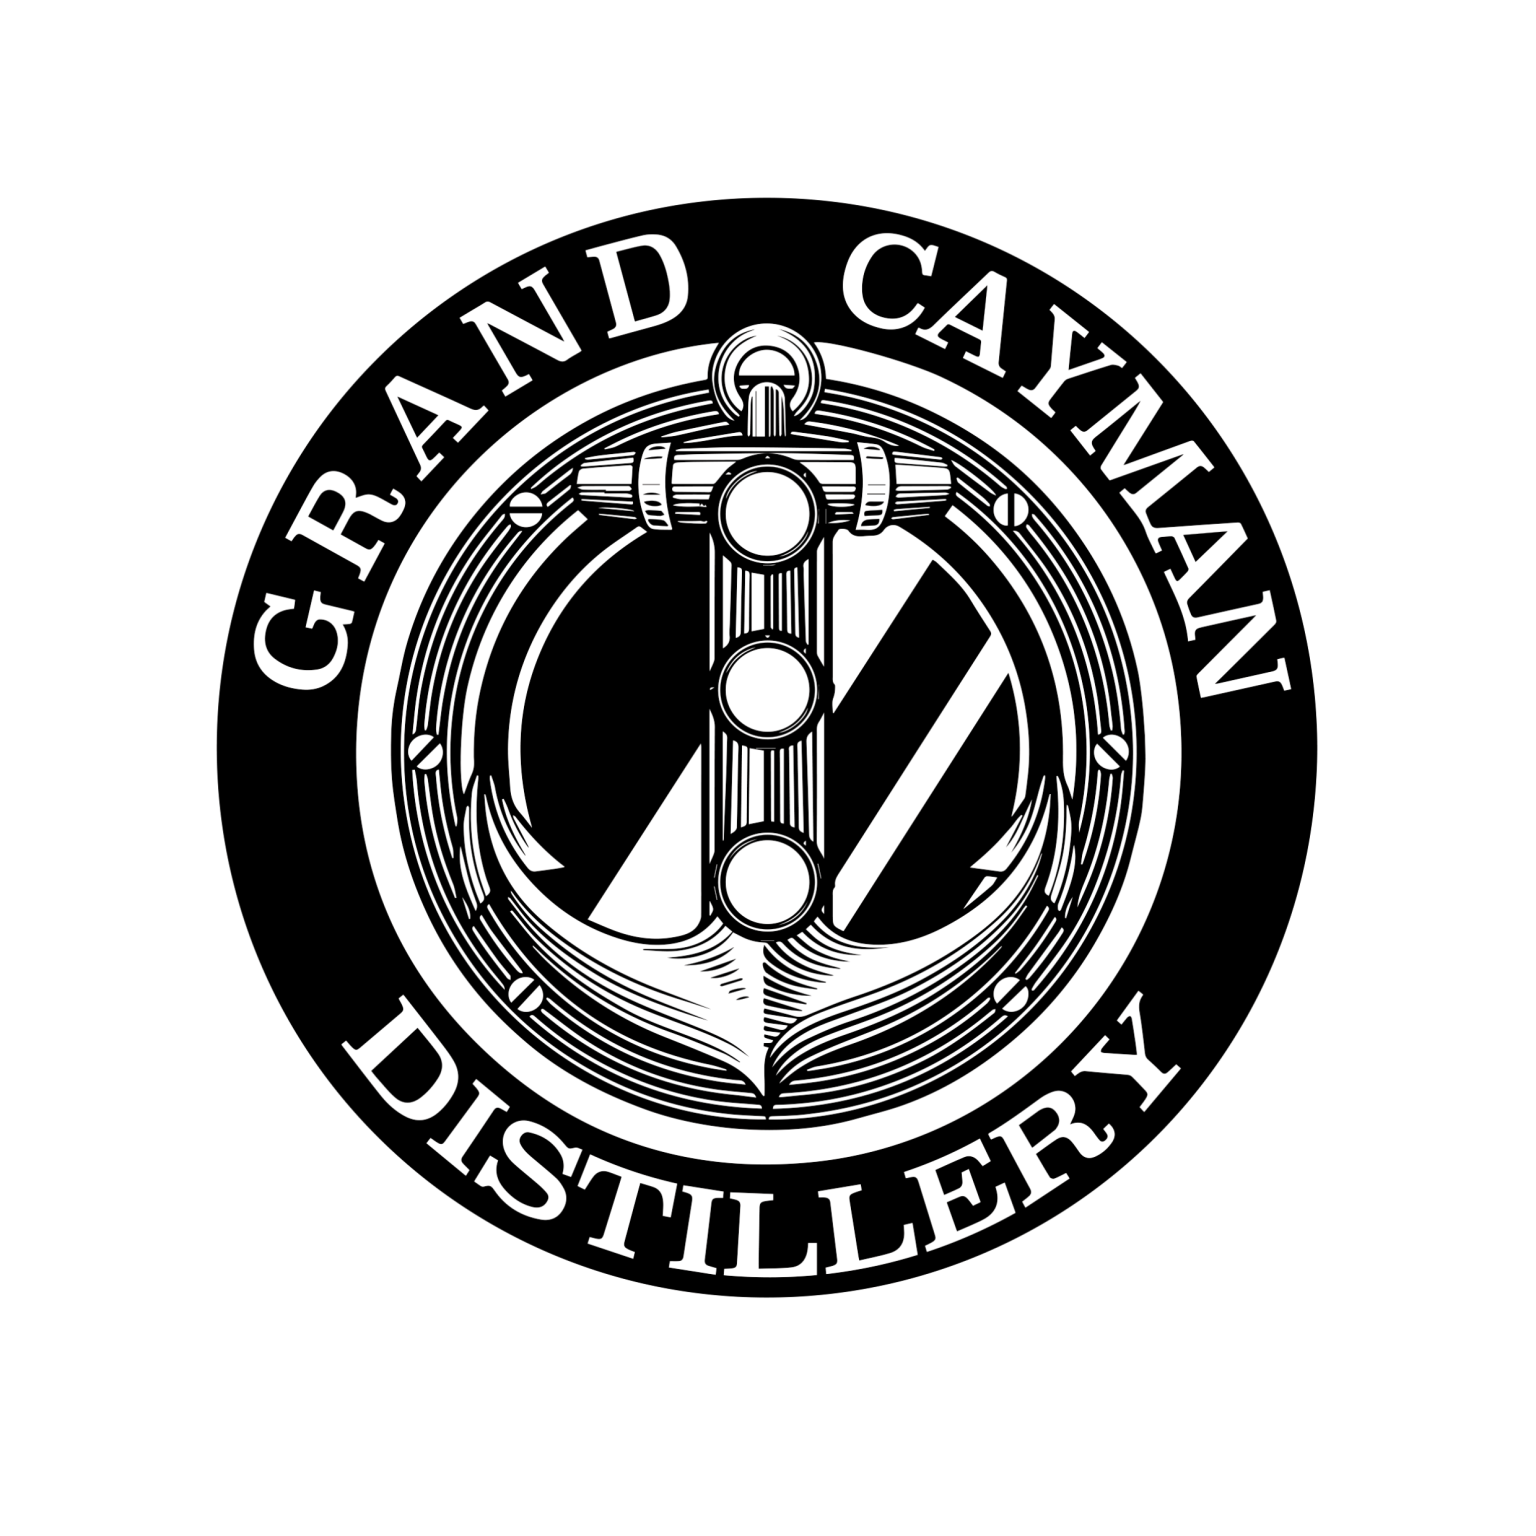 Grand Cayman Distillery Logo to showcase our clients and our social media management page